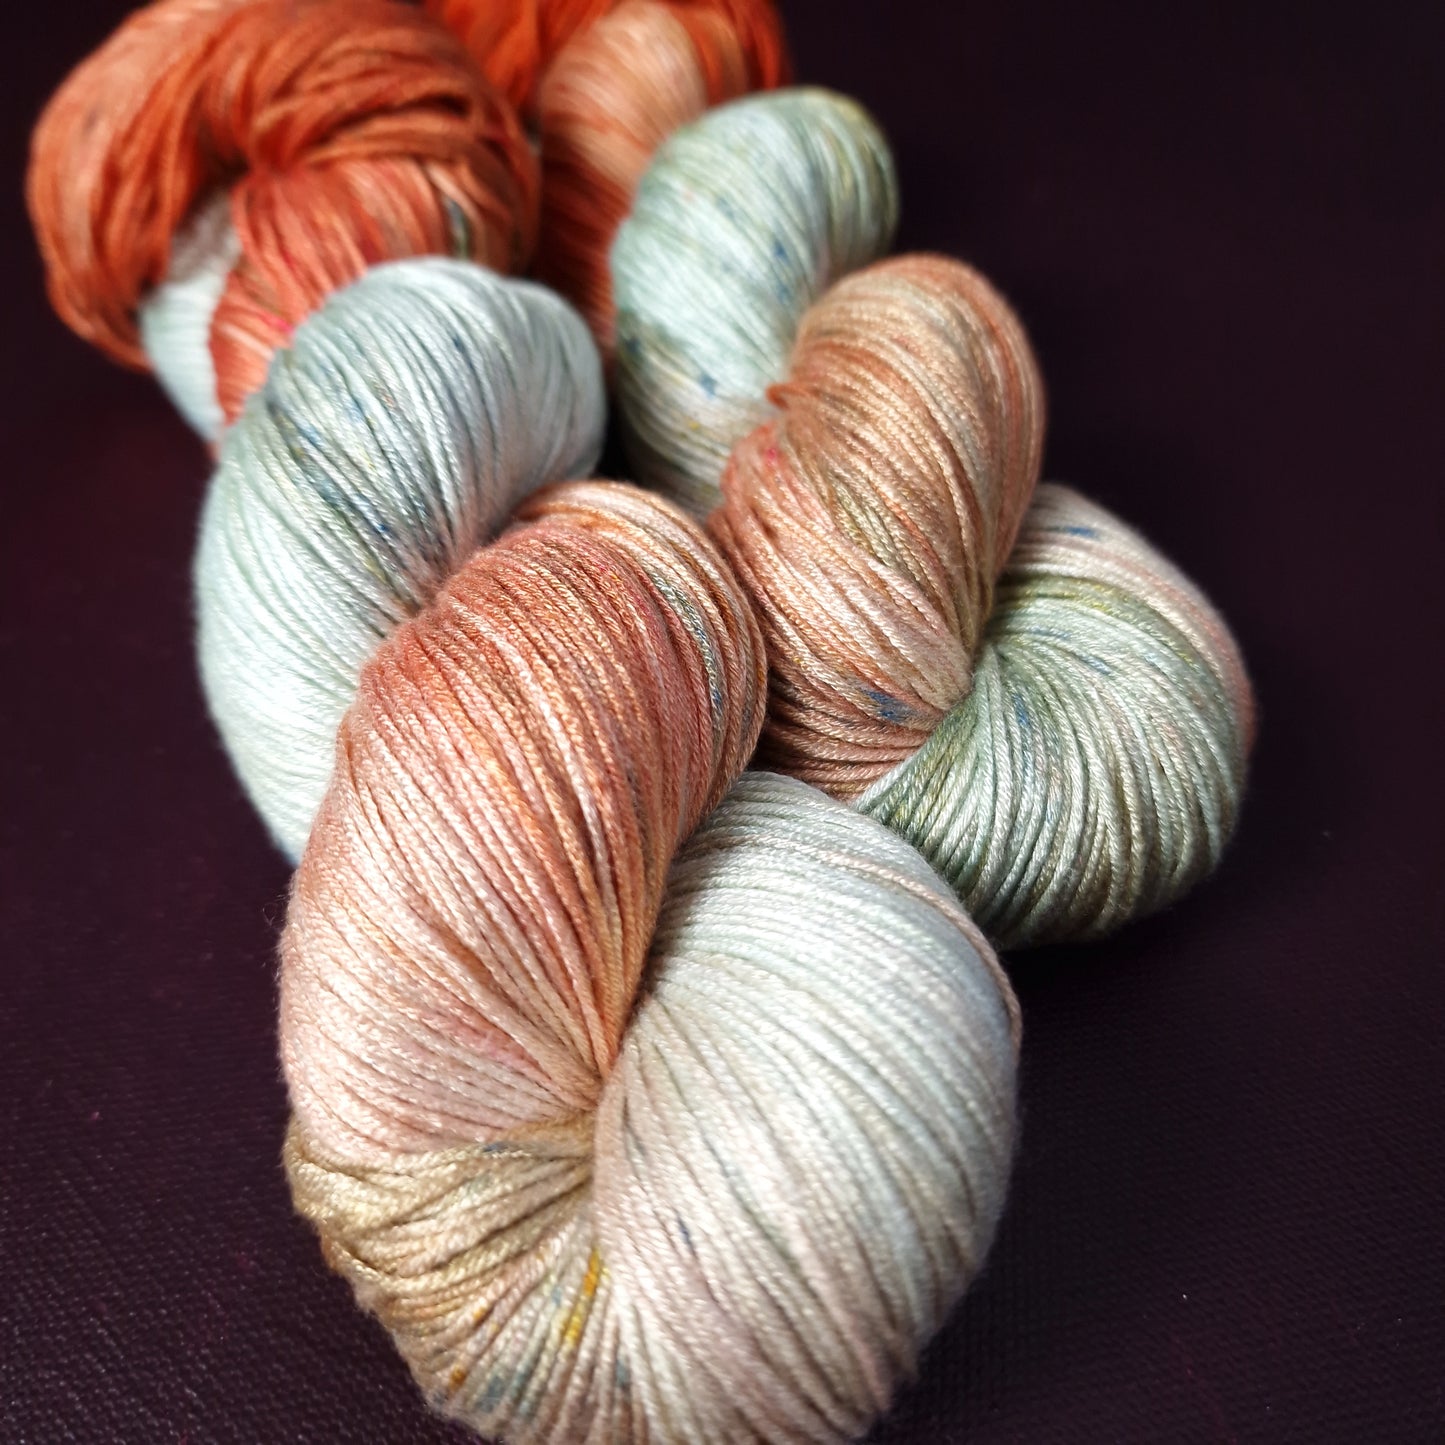 Hand dyed yarn ~ Peach On The Beach *** Dyed to order ~ fingering / DK weight tencel OR bamboo yarn, vegan, hand painted